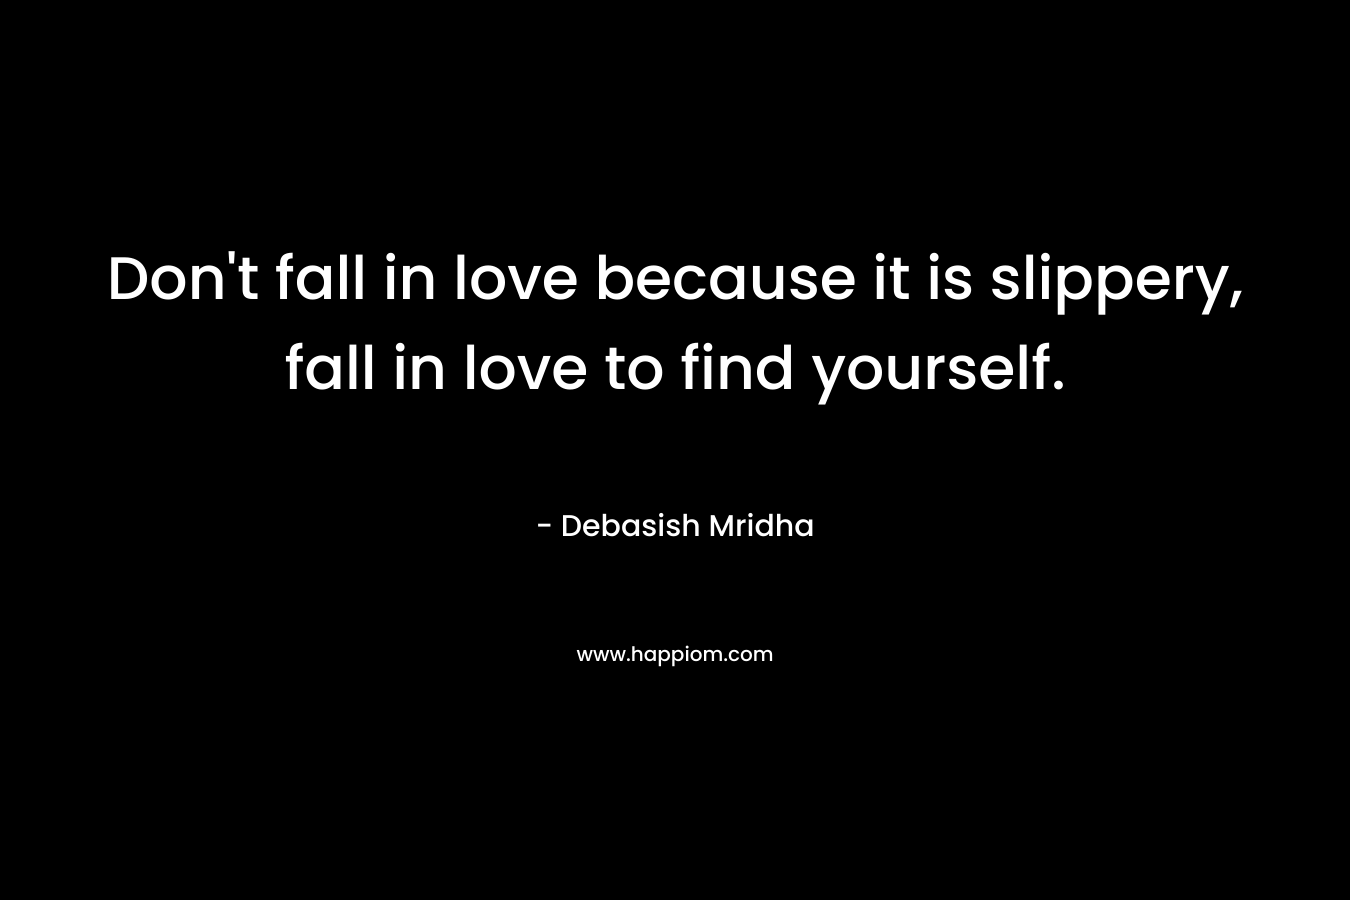 Don't fall in love because it is slippery, fall in love to find yourself.